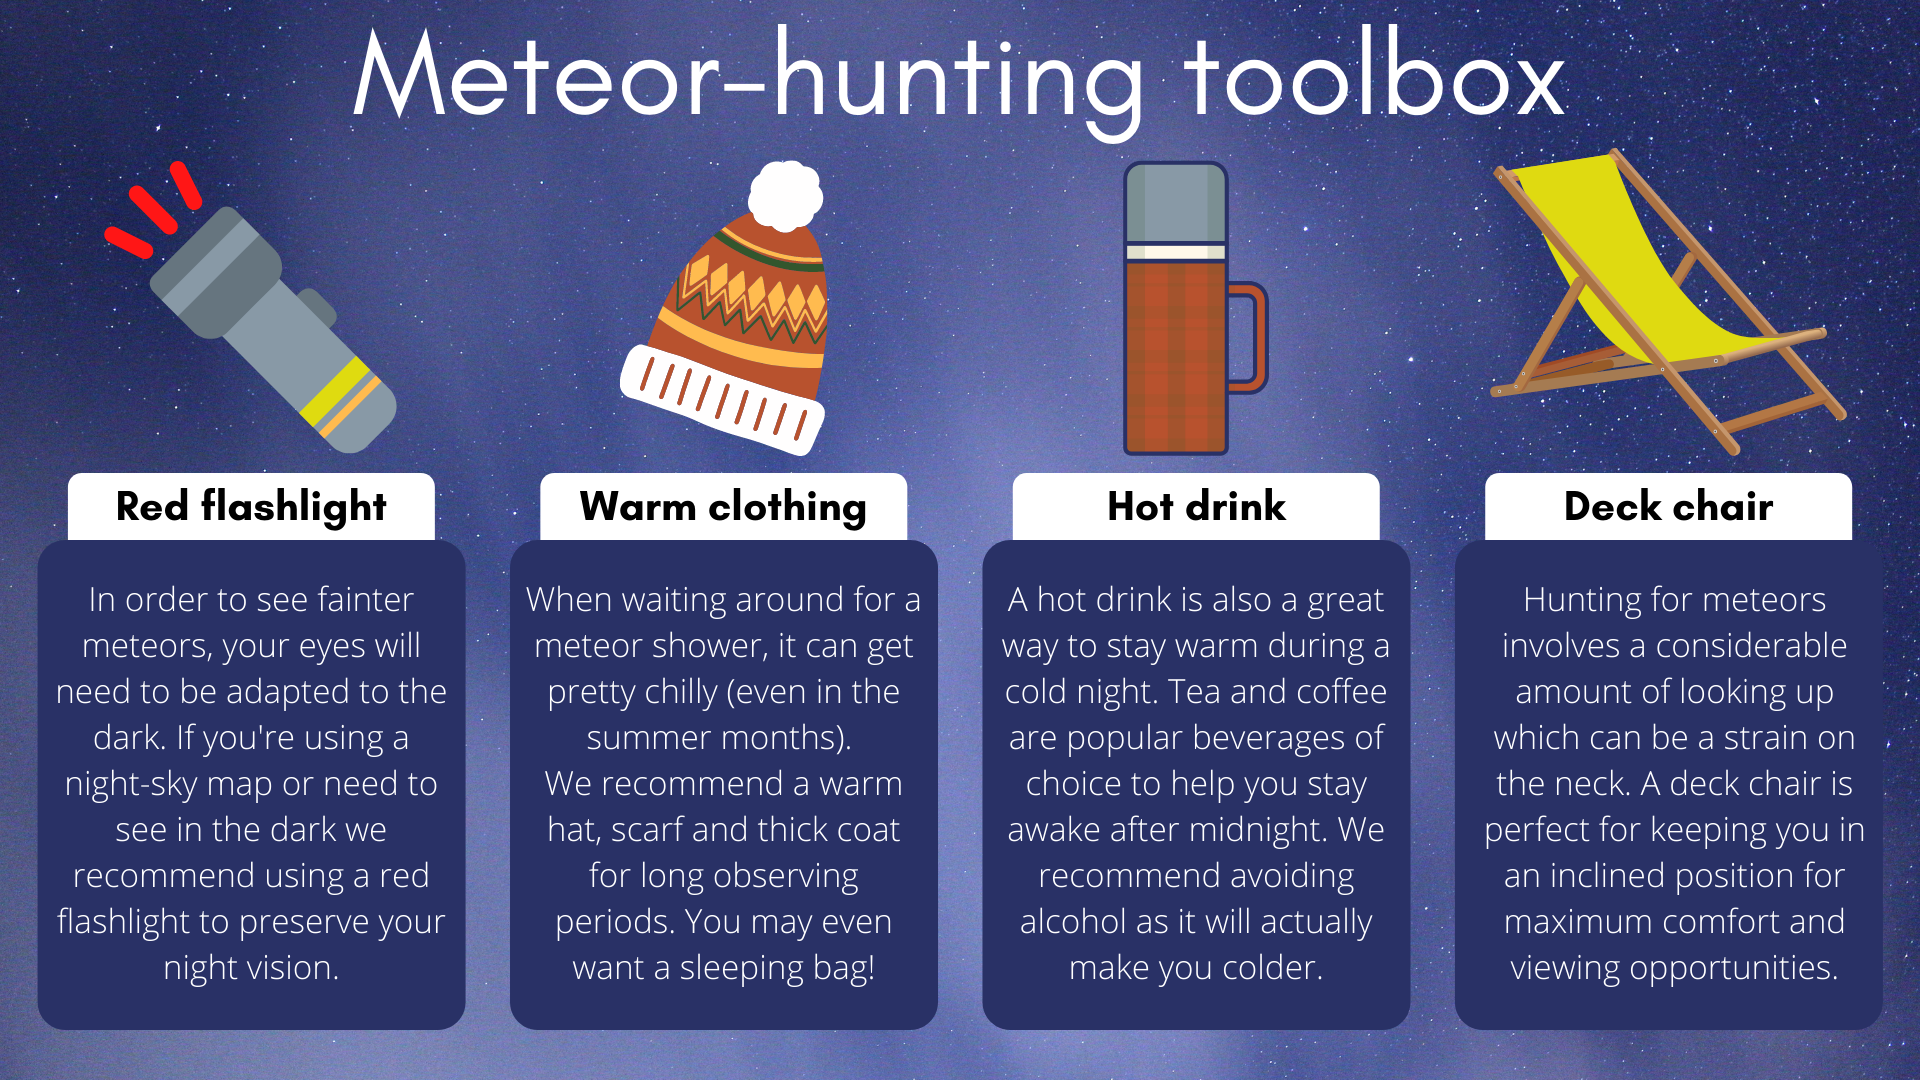 Infographic with a ref flashlight, woolly hat, flask and a deck chair.